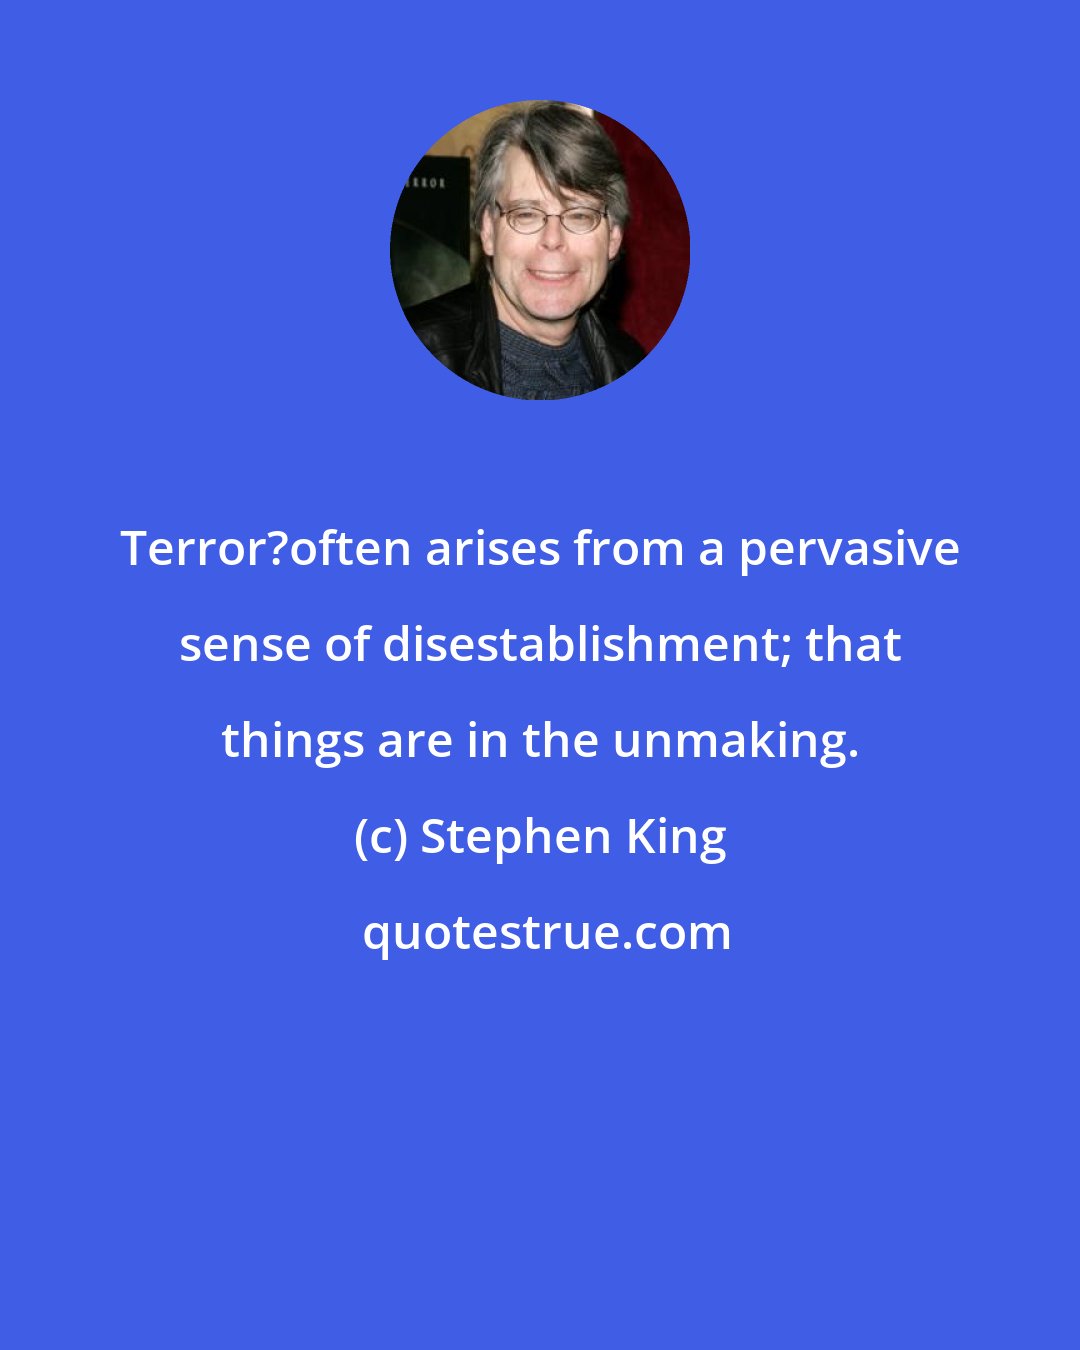 Stephen King: Terror?often arises from a pervasive sense of disestablishment; that things are in the unmaking.